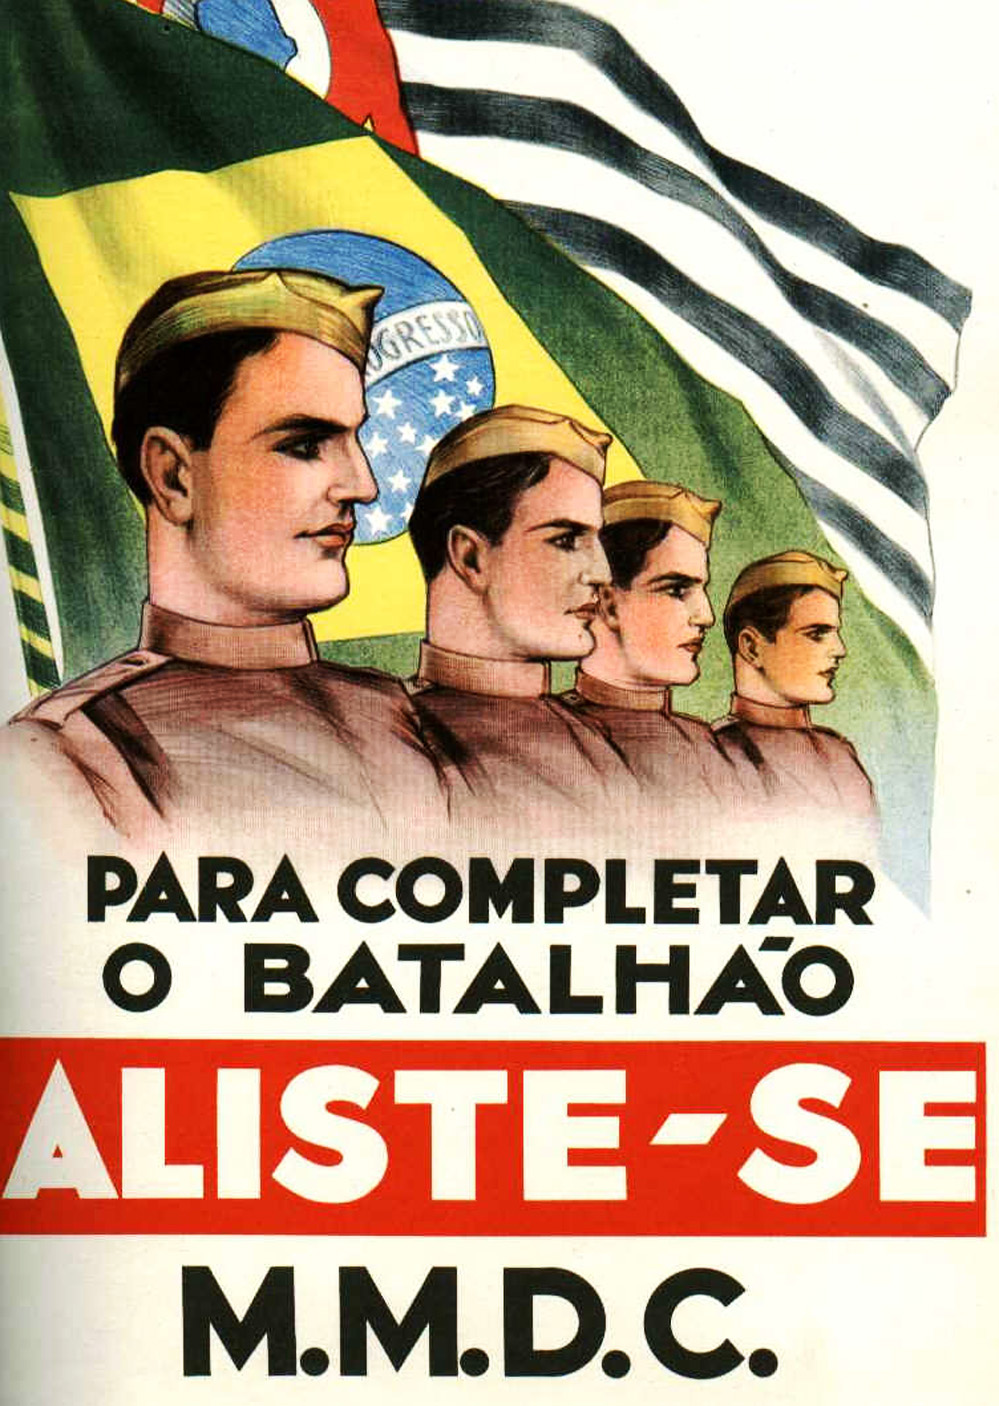 Cartaz alistamento MMDC <a style='float:right' href='https://www3.al.sp.gov.br/repositorio/noticia/N-07-2014/fg164329.jpg' target=_blank><img src='/_img/material-file-download-white.png' width='14px' alt='Clique para baixar a imagem'></a>